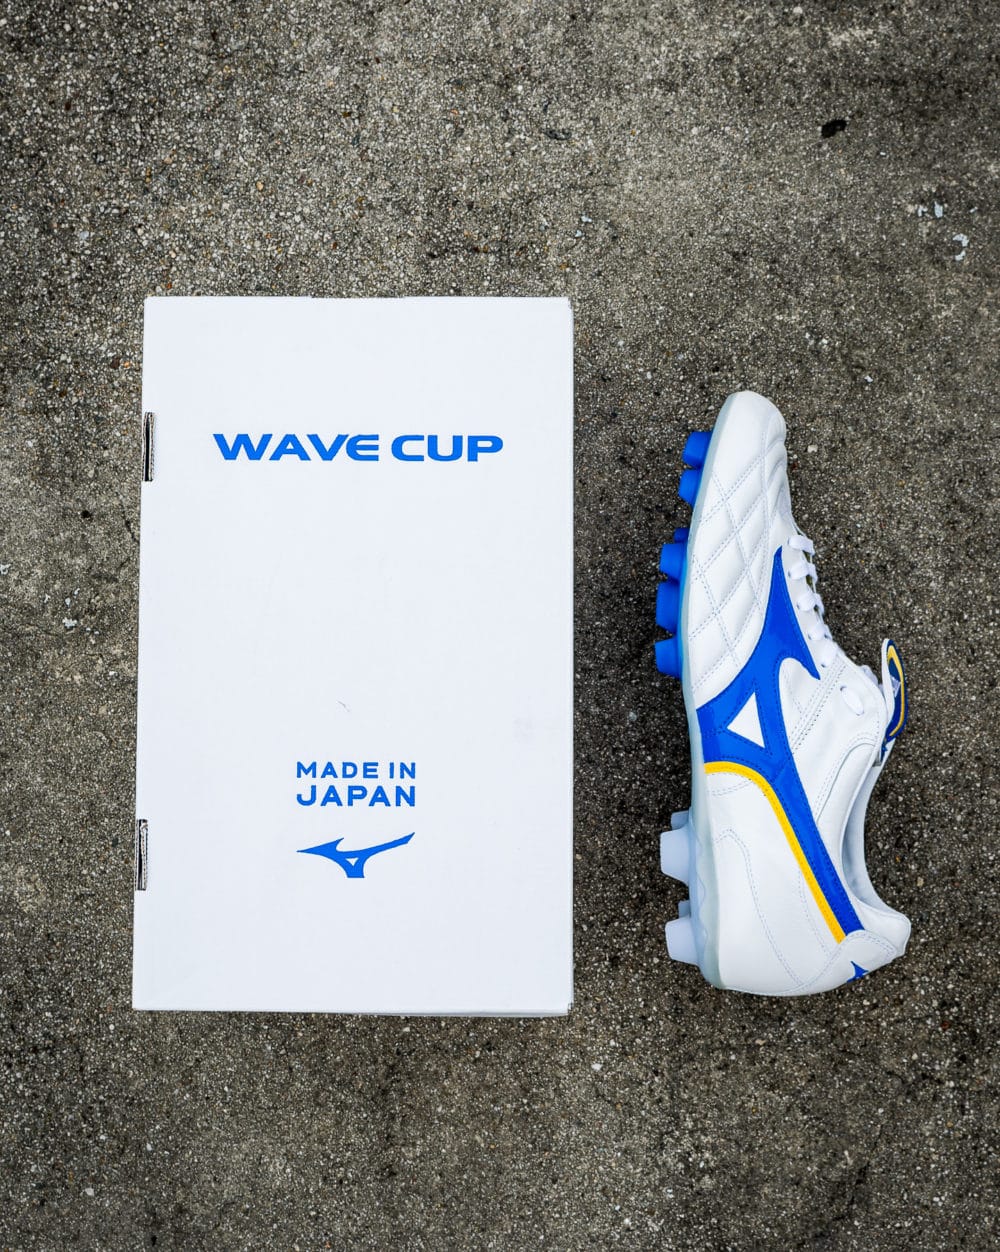 Mizuno Wave Cup Legend: Made in Japan